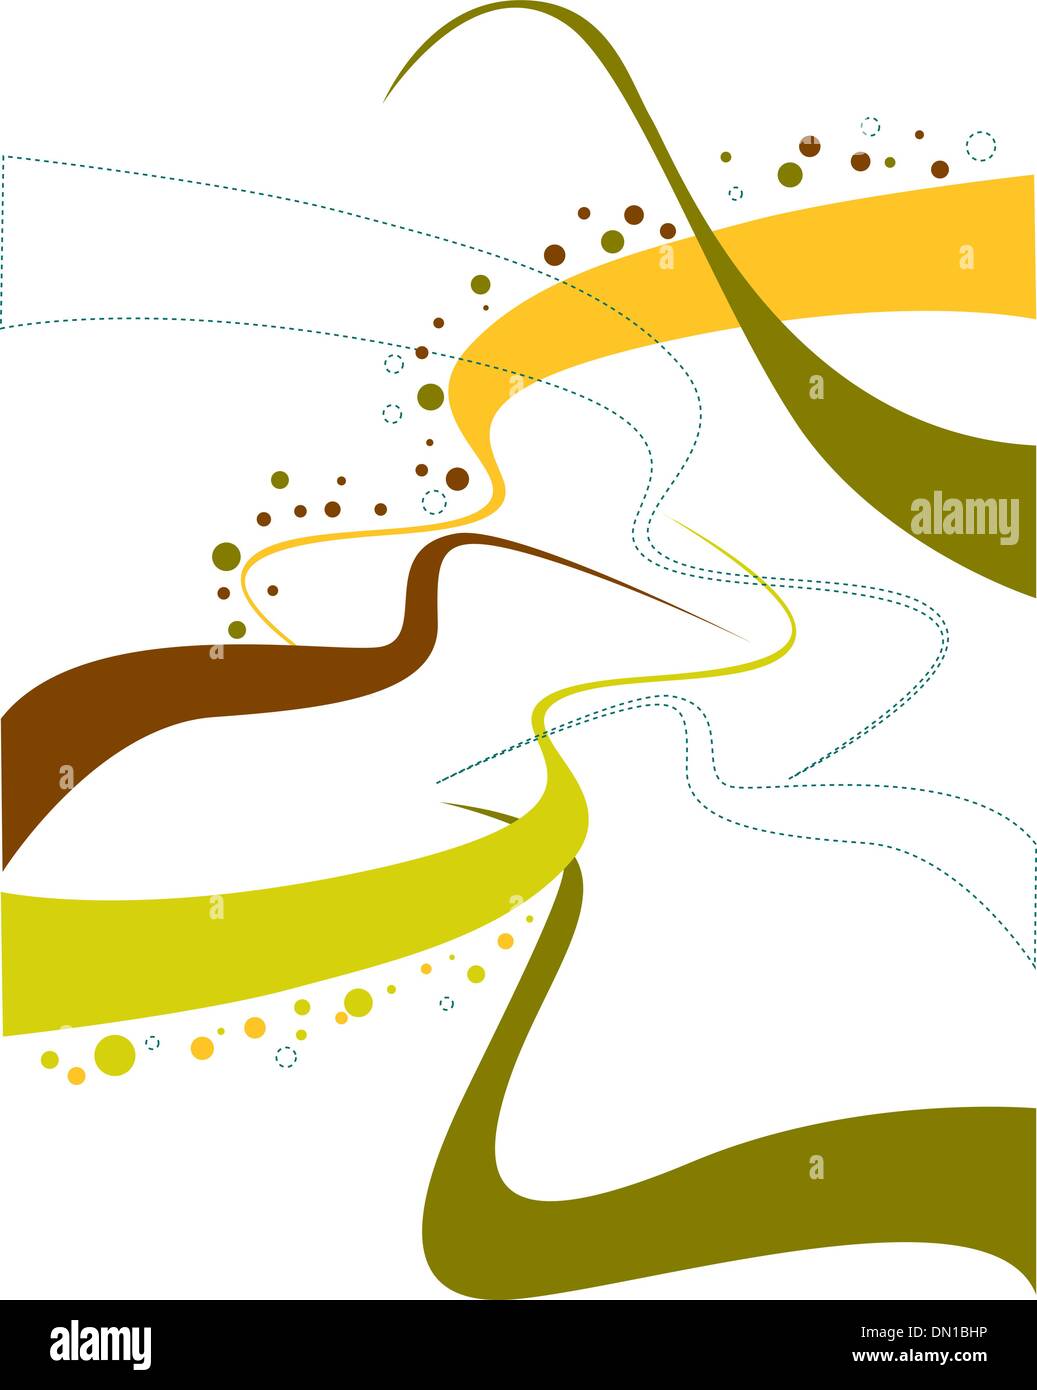 curves and circles illustration Stock Vector